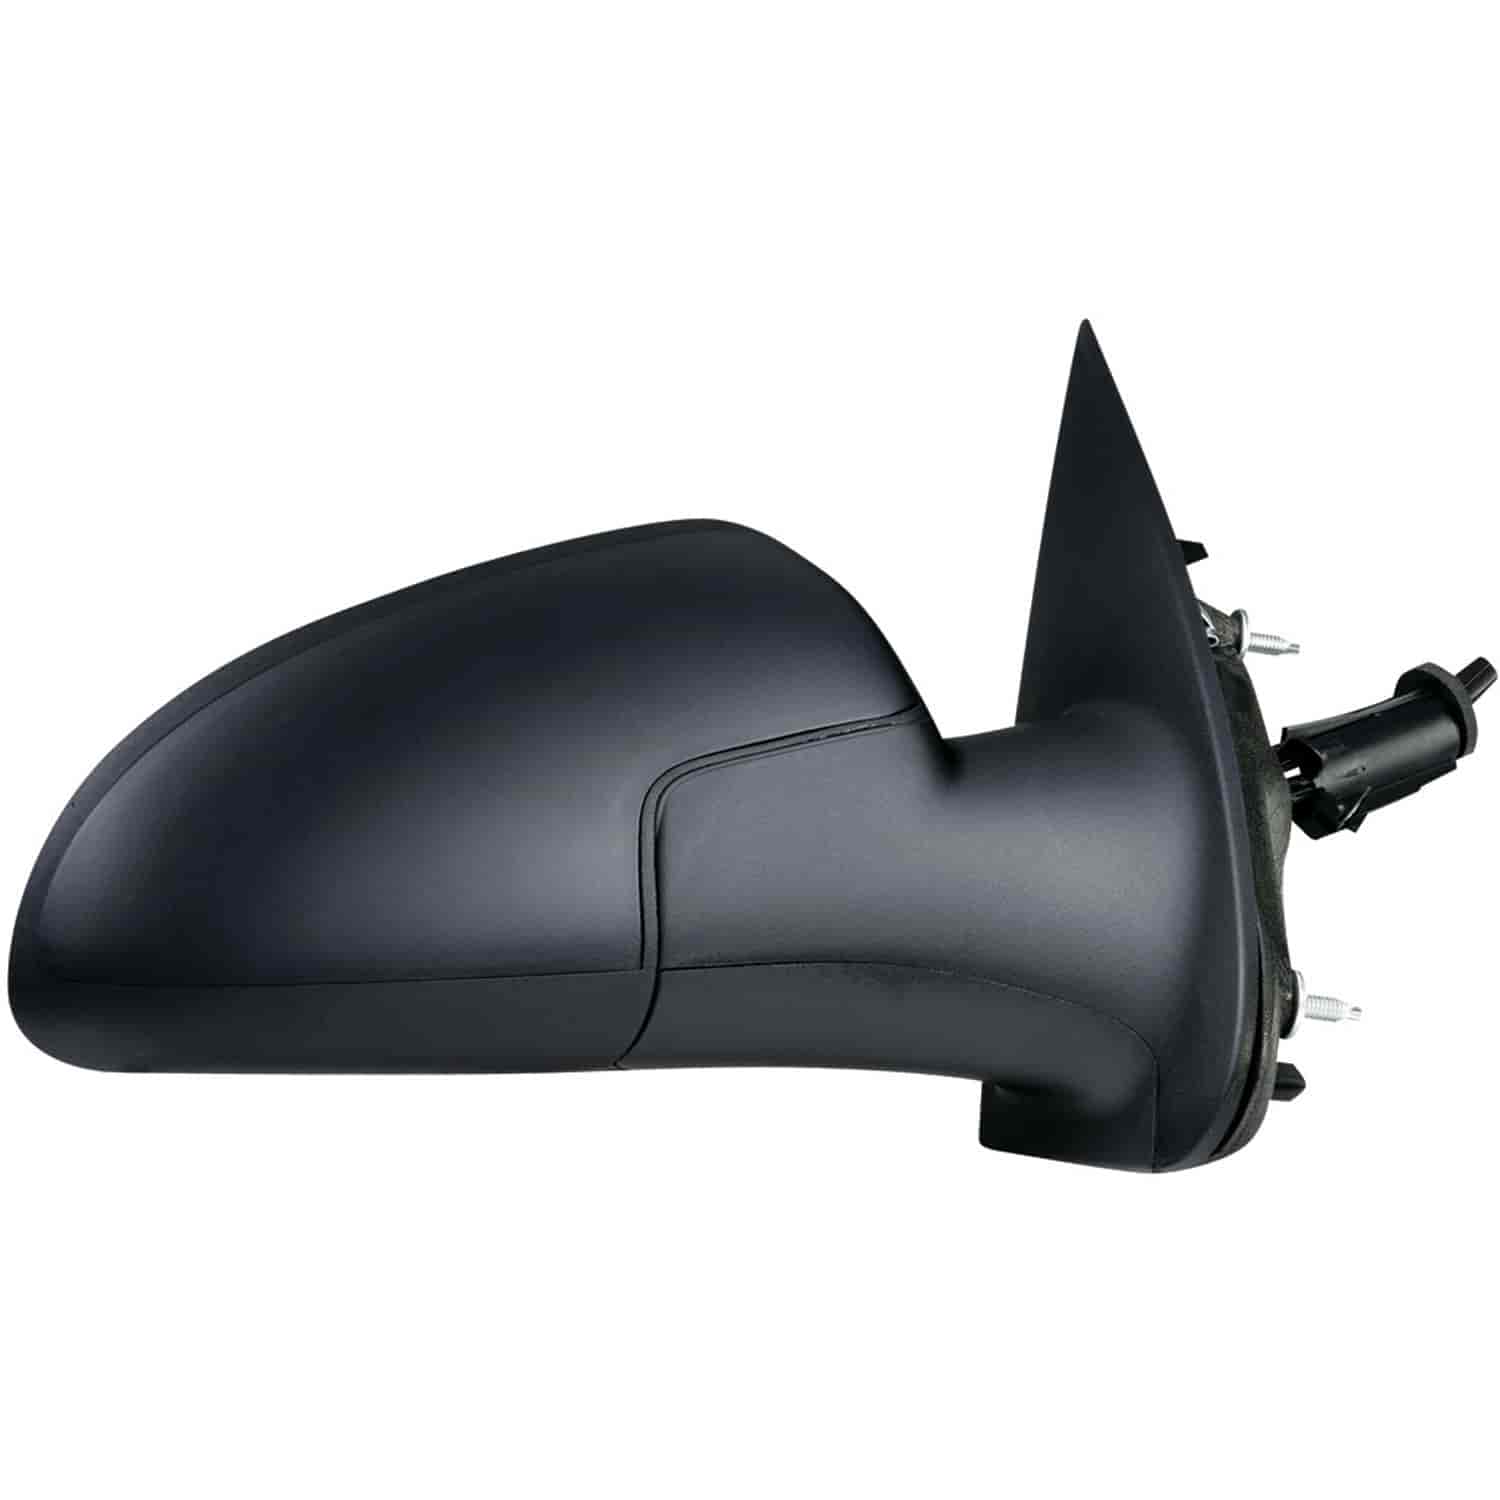 OEM Style Replacement mirror for 05-10 Chevrolet Cobalt Coupe passenger side mirror tested to fit an